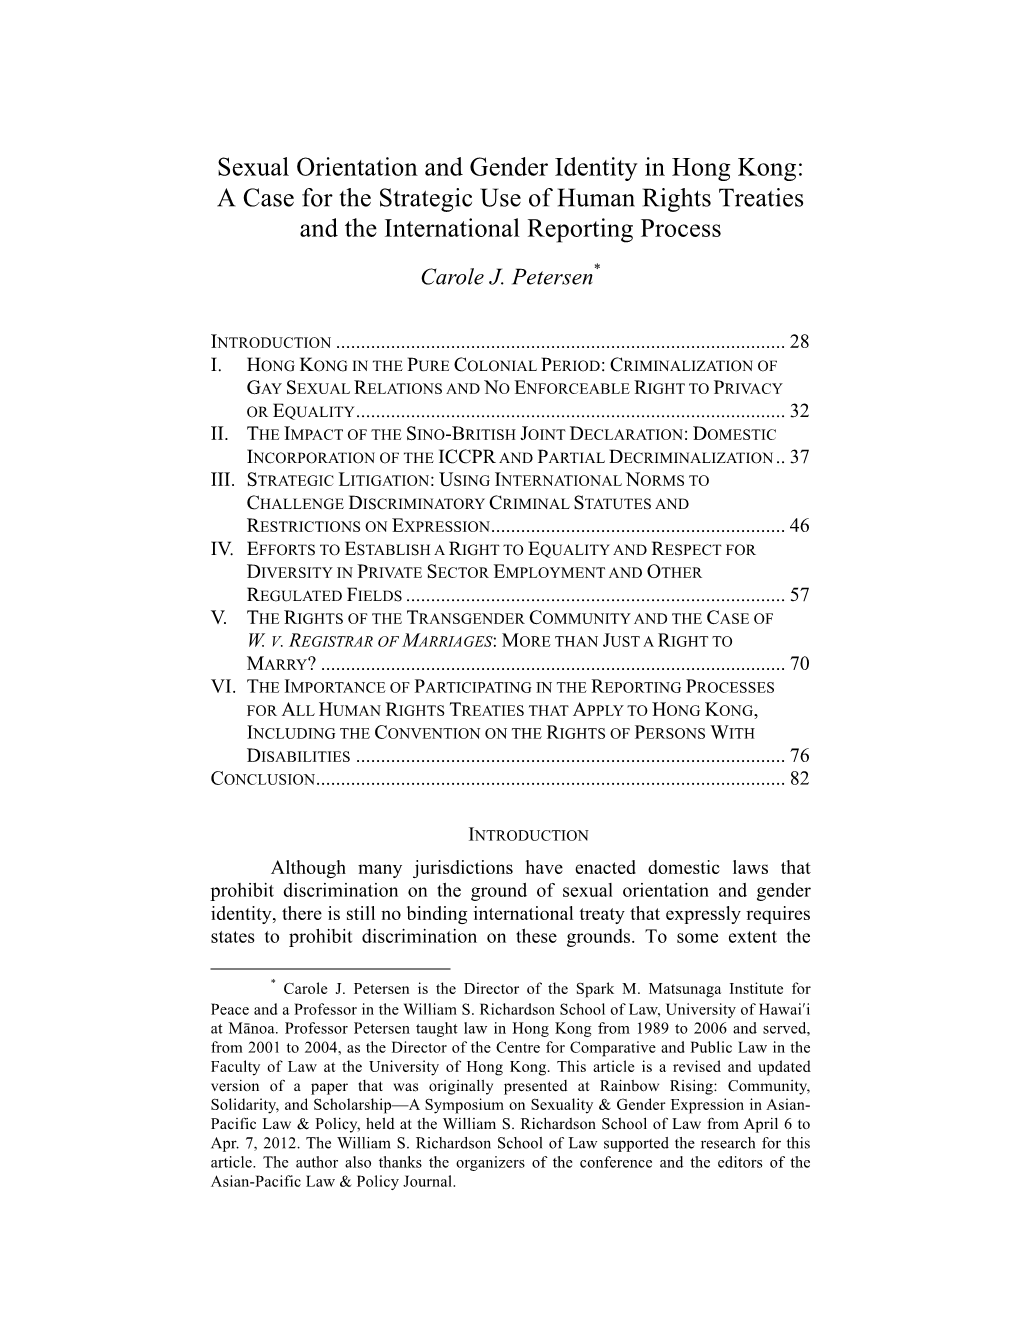 Sexual Orientation and Gender Identity in Hong Kong: a Case for the Strategic Use of Human Rights Treaties and the International Reporting Process